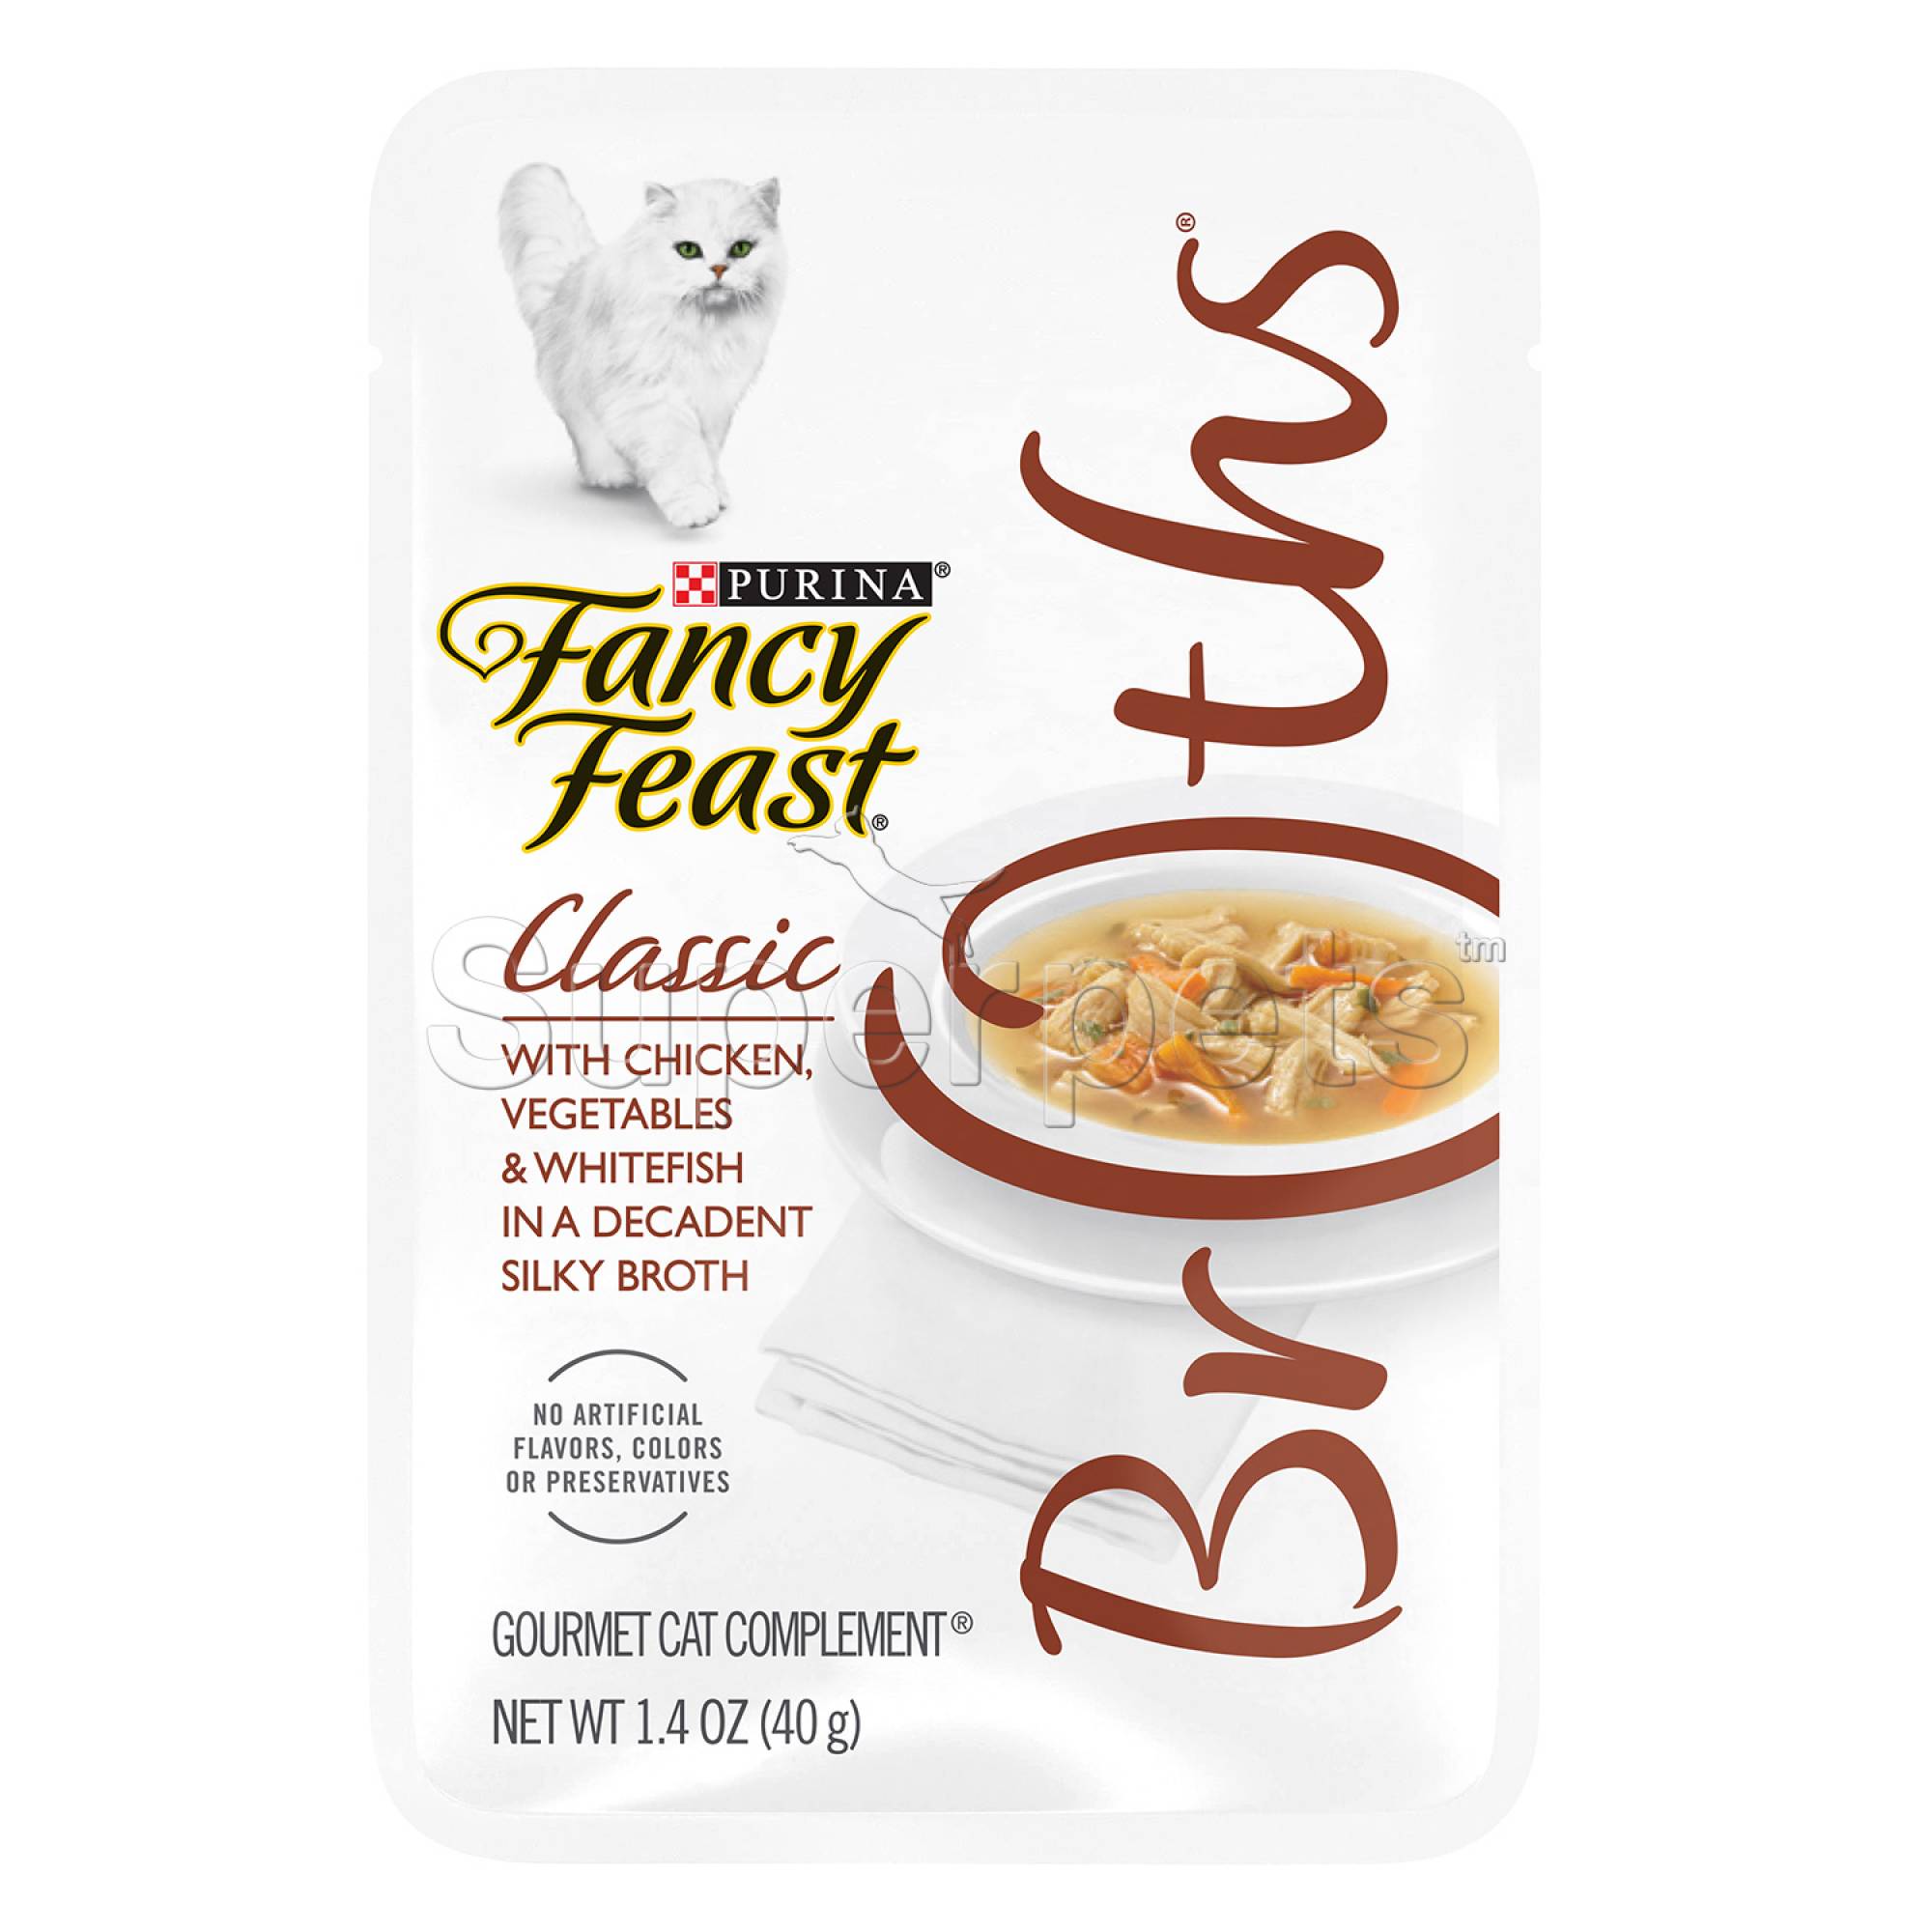 Fancy Feast - Broths - Classic with Chicken, Vegetables & Whitefish in a Decadent Silky Broth 40g